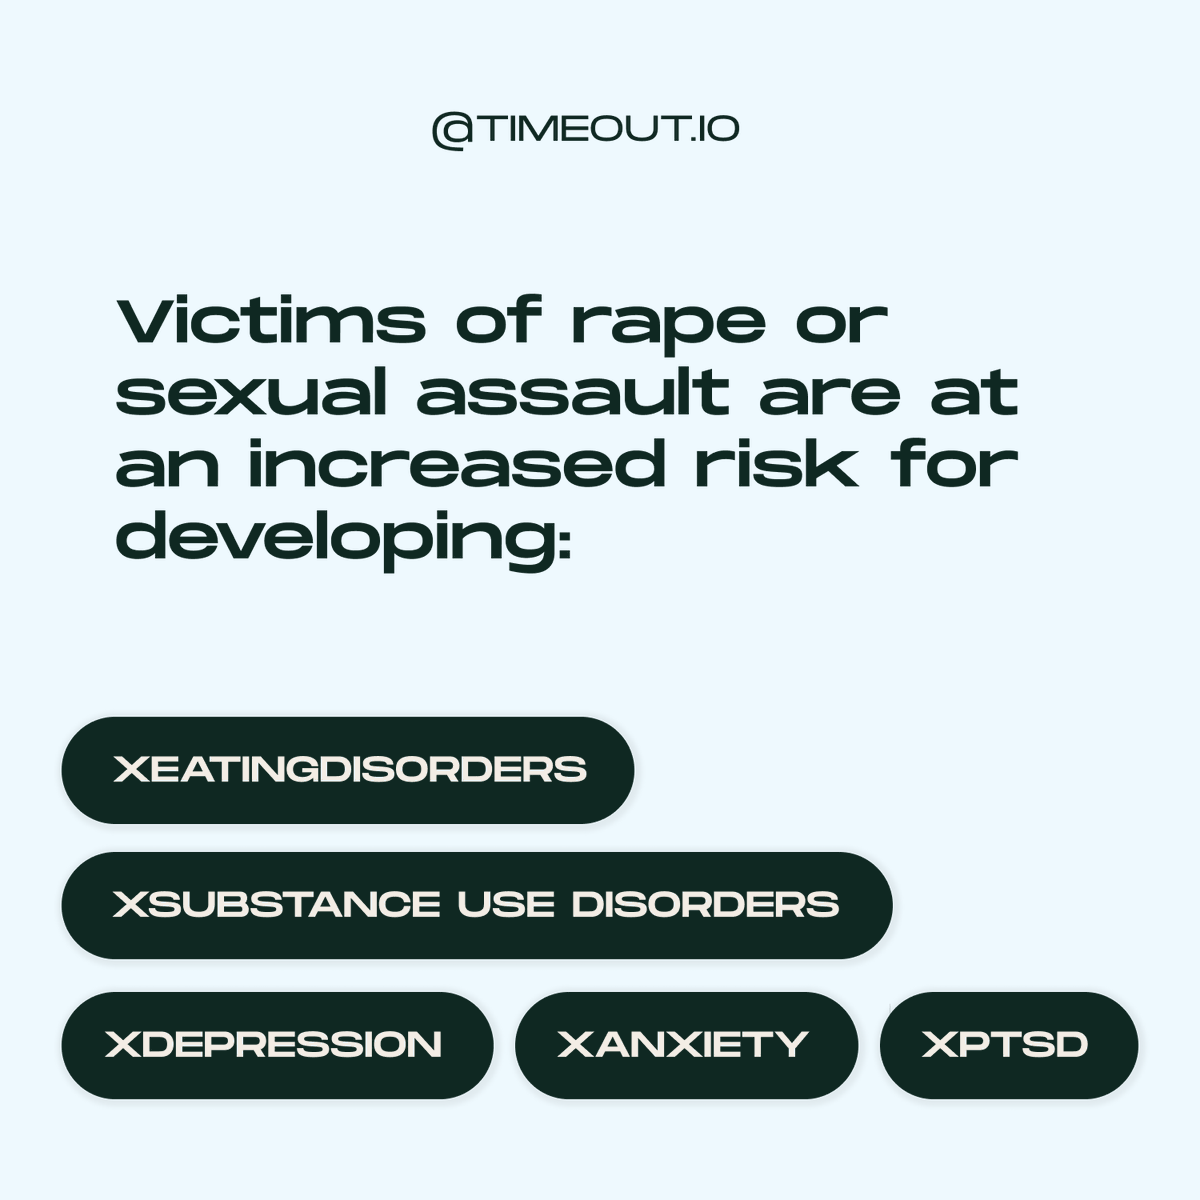 April is #SexualAssault Awareness and Prevention Month. Sexual harassment, assault, and abuse can happen anywhere, including in online spaces. Let’s build safe online spaces together. 💙

#TakeATimeout #Timeout #sexualassaultawareness  #mentalhealth #athletementalhealth